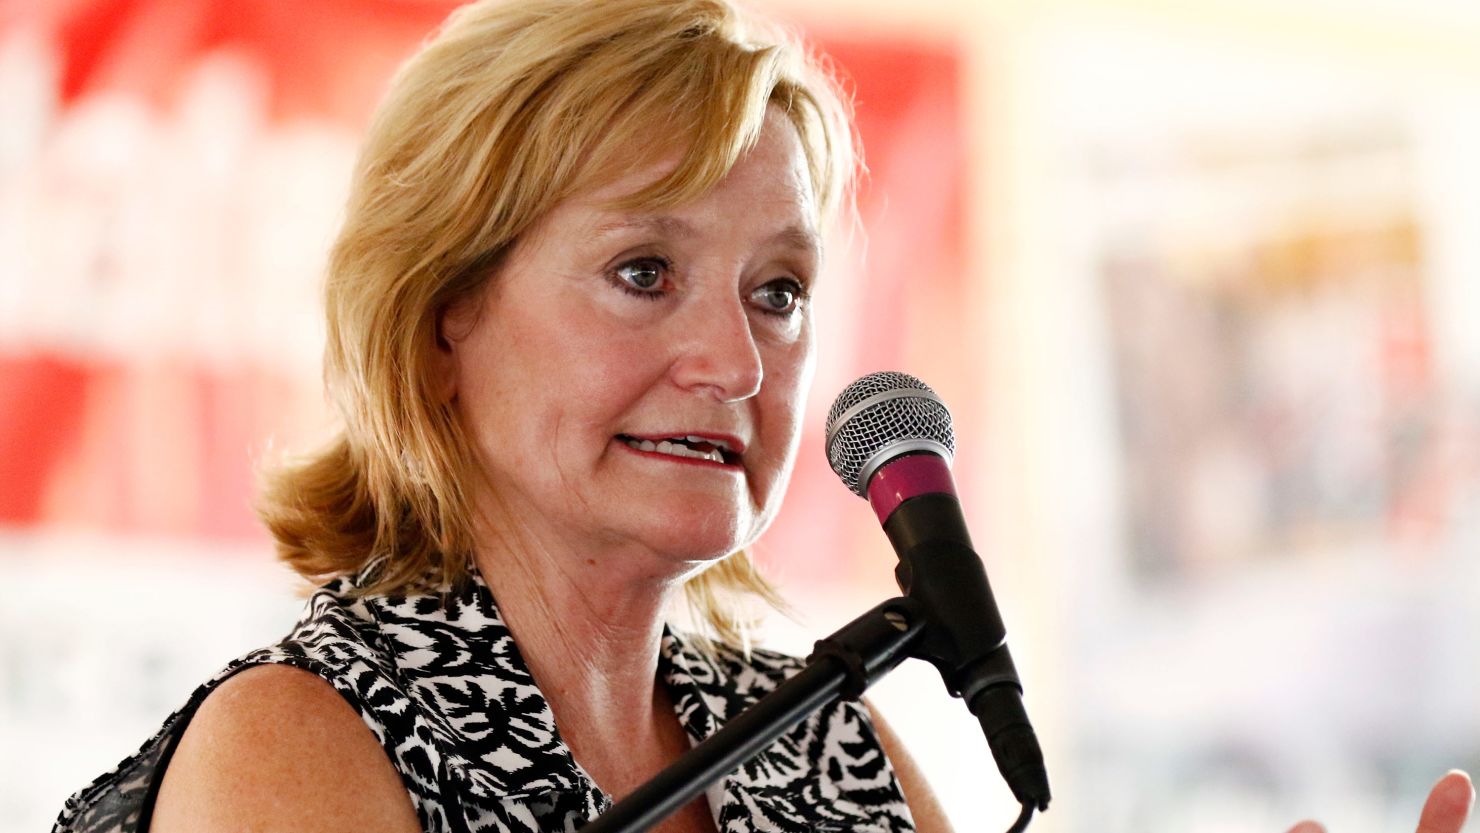 State Commissioner of Agriculture and Commerce Cindy Hyde-Smith speaks at the Neshoba County Fair in Philadelphia, Mississippi, in July 2017. (AP Photo/Rogelio V. Solis)